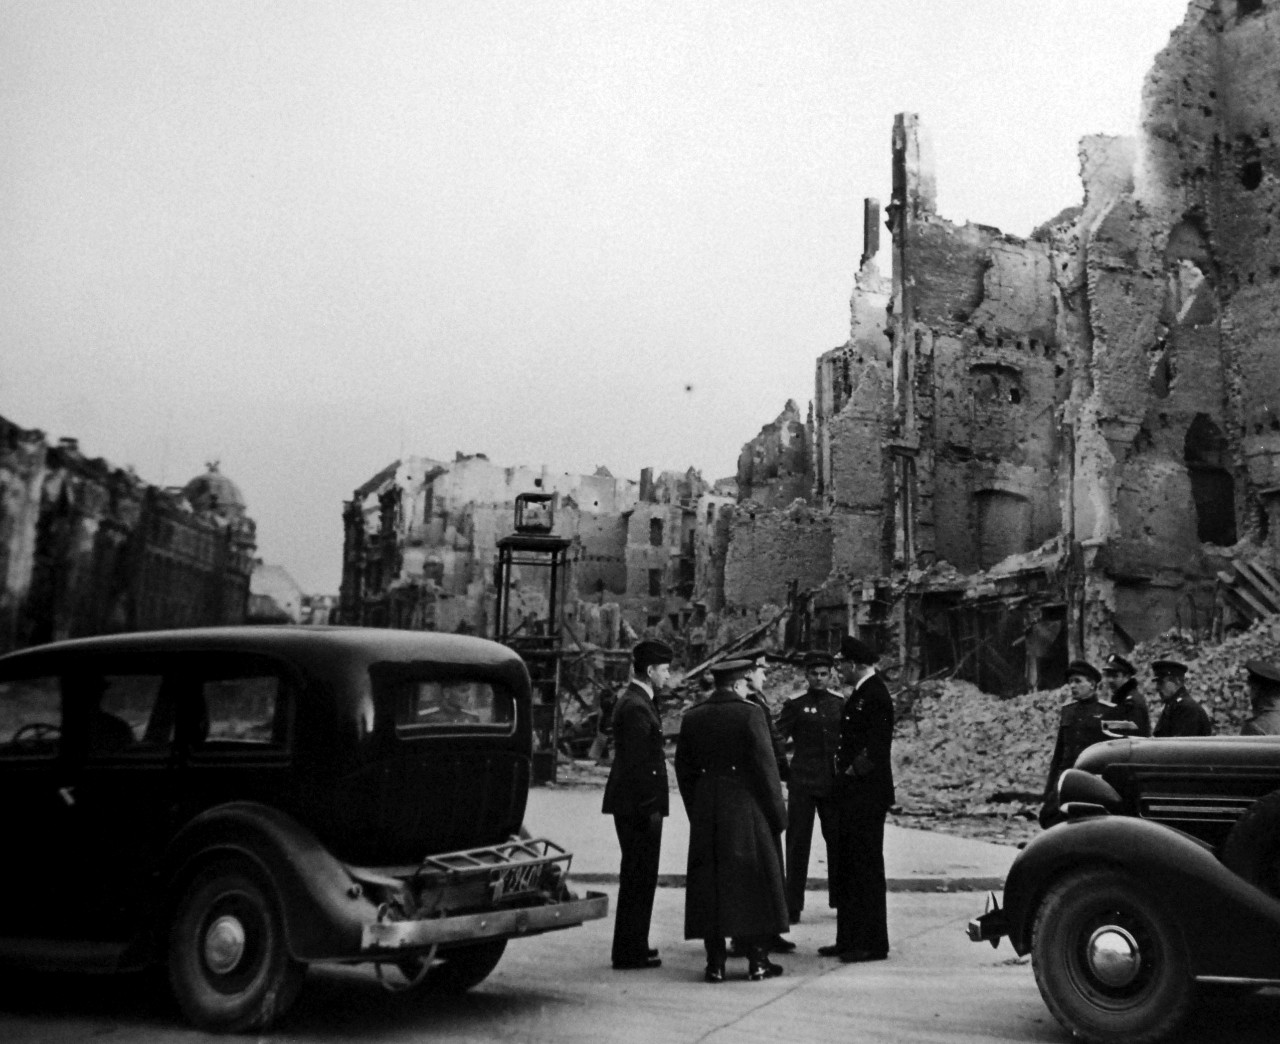 111-SC-27438:   Surrender of Germany, May 9, 1945.  Air Chief Marshall Sir Arthur Teddar, Deputy Supreme Commander and Admiral Sir Harold M. Burroughs, Allied Naval Commander in Chief, are shown around demolished Berlin, Germany, by their Russian hosts.  Supreme Headquarters Allied Expeditionary Force (SHAEF) Officials are there to sign the ratified surrender terms agreed upon at Reims.   Photographed by Lieutenant Moore.   U.S. Army photograph.  Courtesy of the Library of Congress Collection, Lot-8988. (2015/10/16).